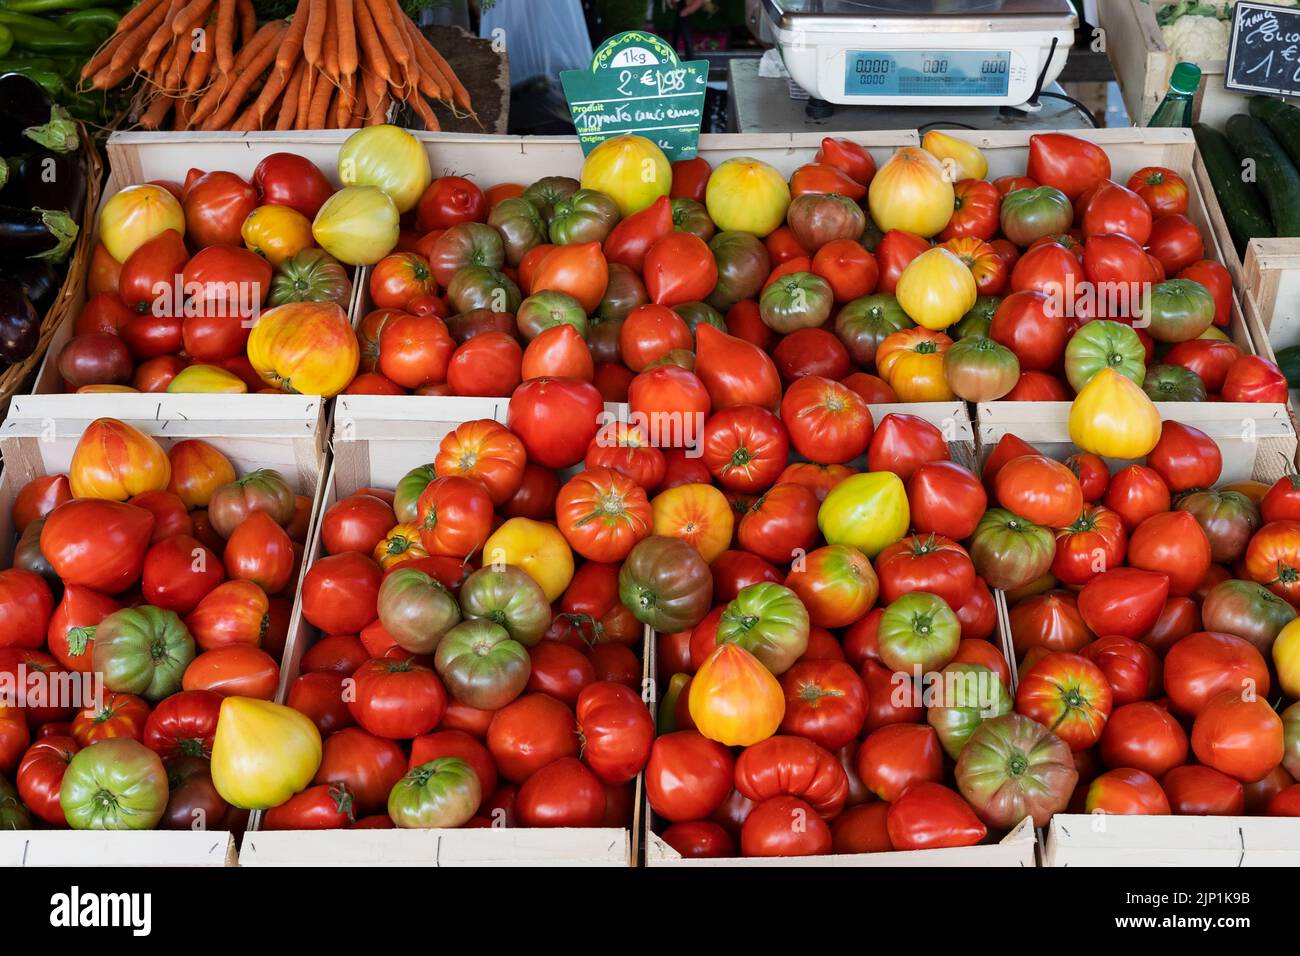 Tomatoes stall in the market of Sanary-sur-mer, France Stock Photo